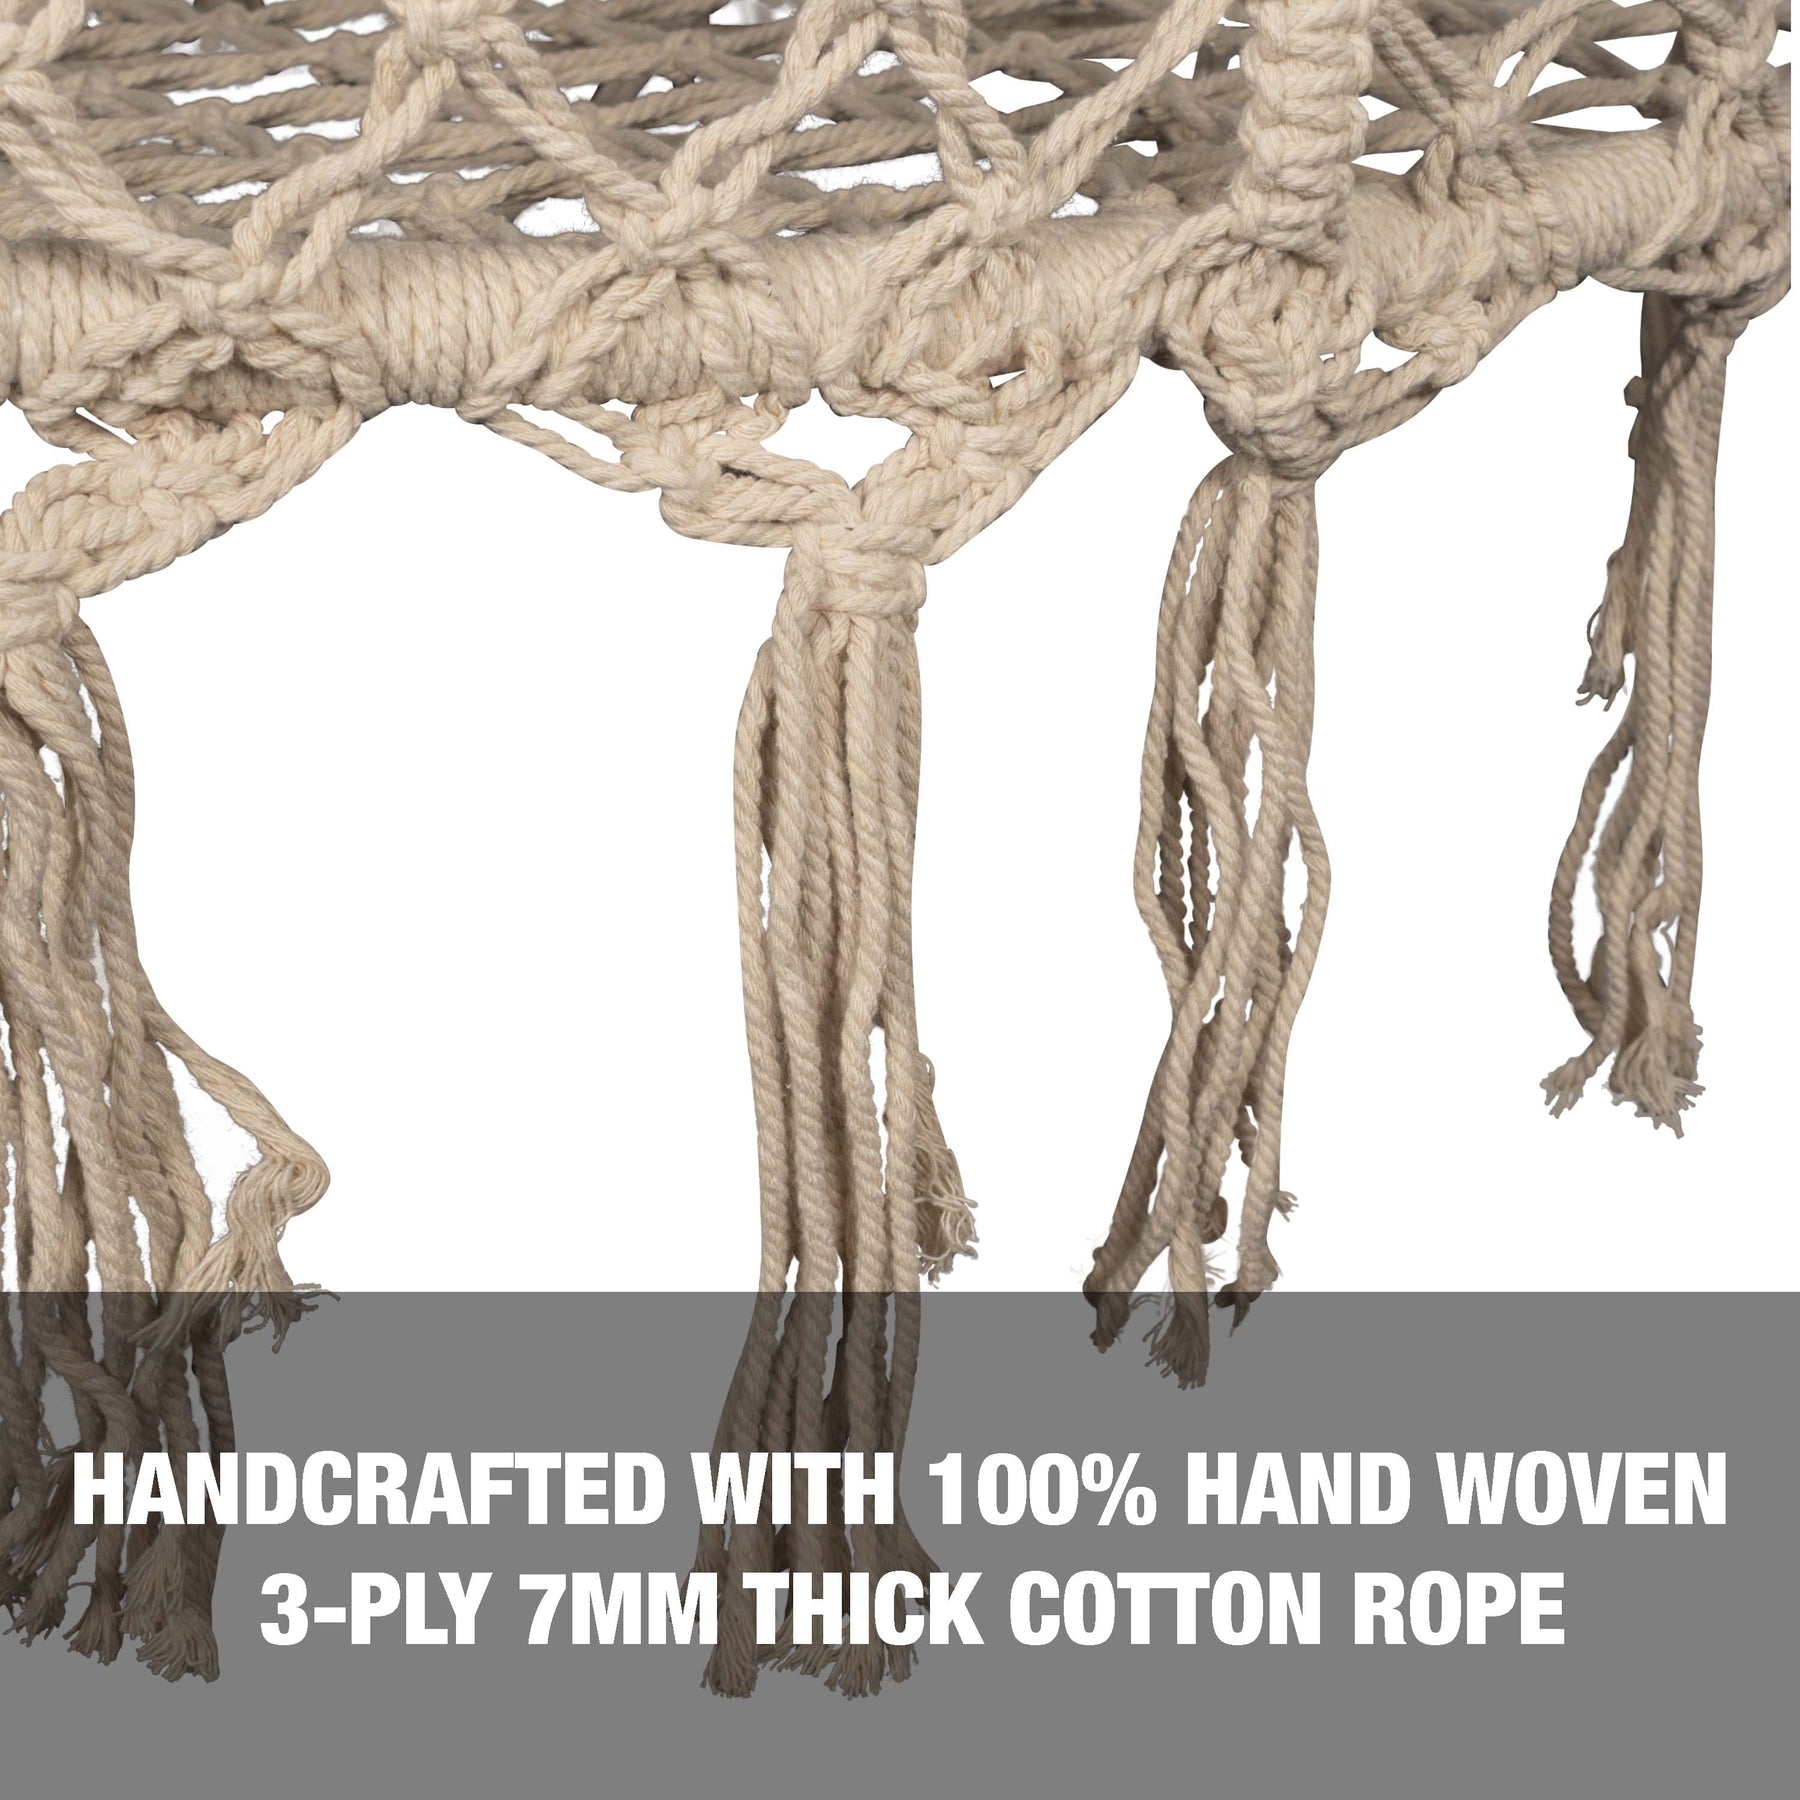 Handcrafted with 100 percent hand woven 3-ply 7mm thick cotton rope.